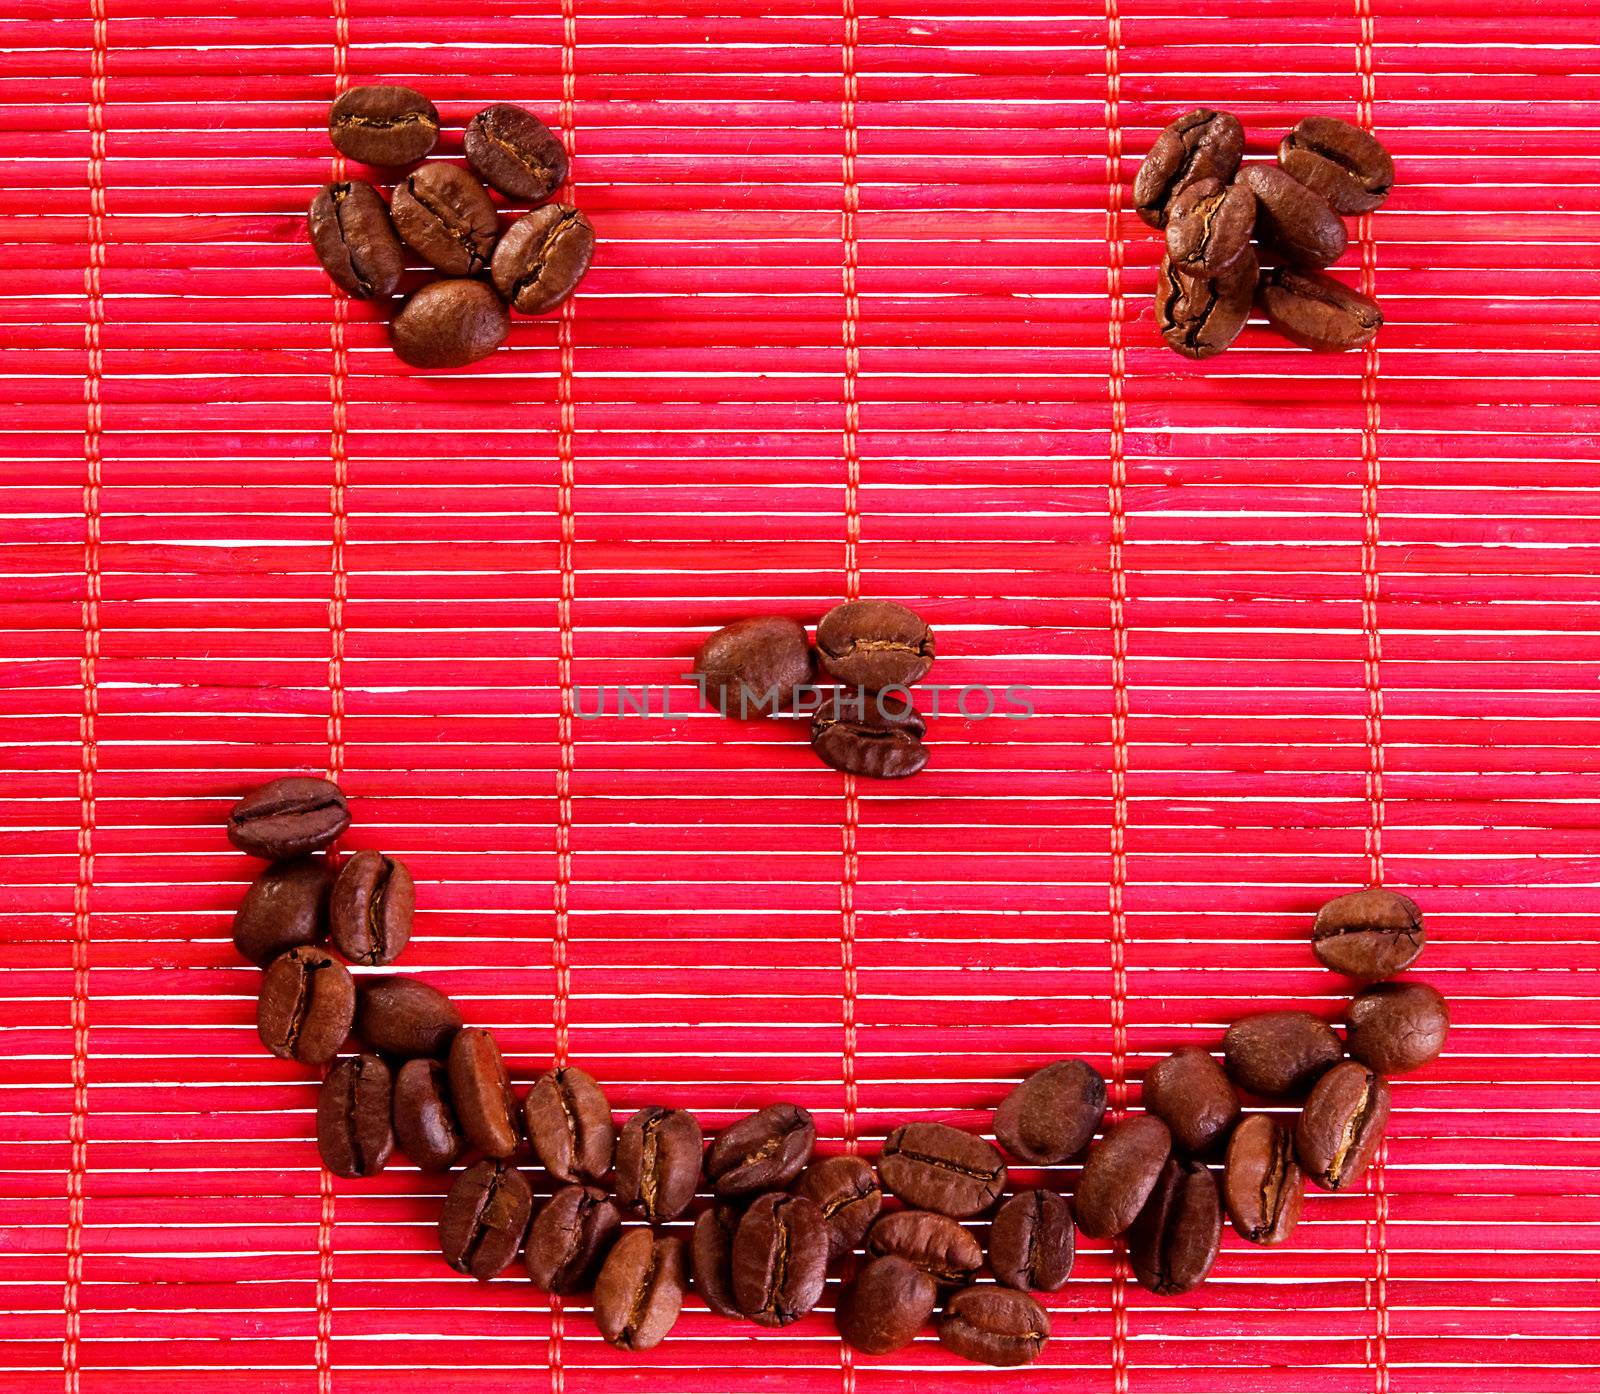 Roasted coffee beans placed in shape of smile on a bamboo mat